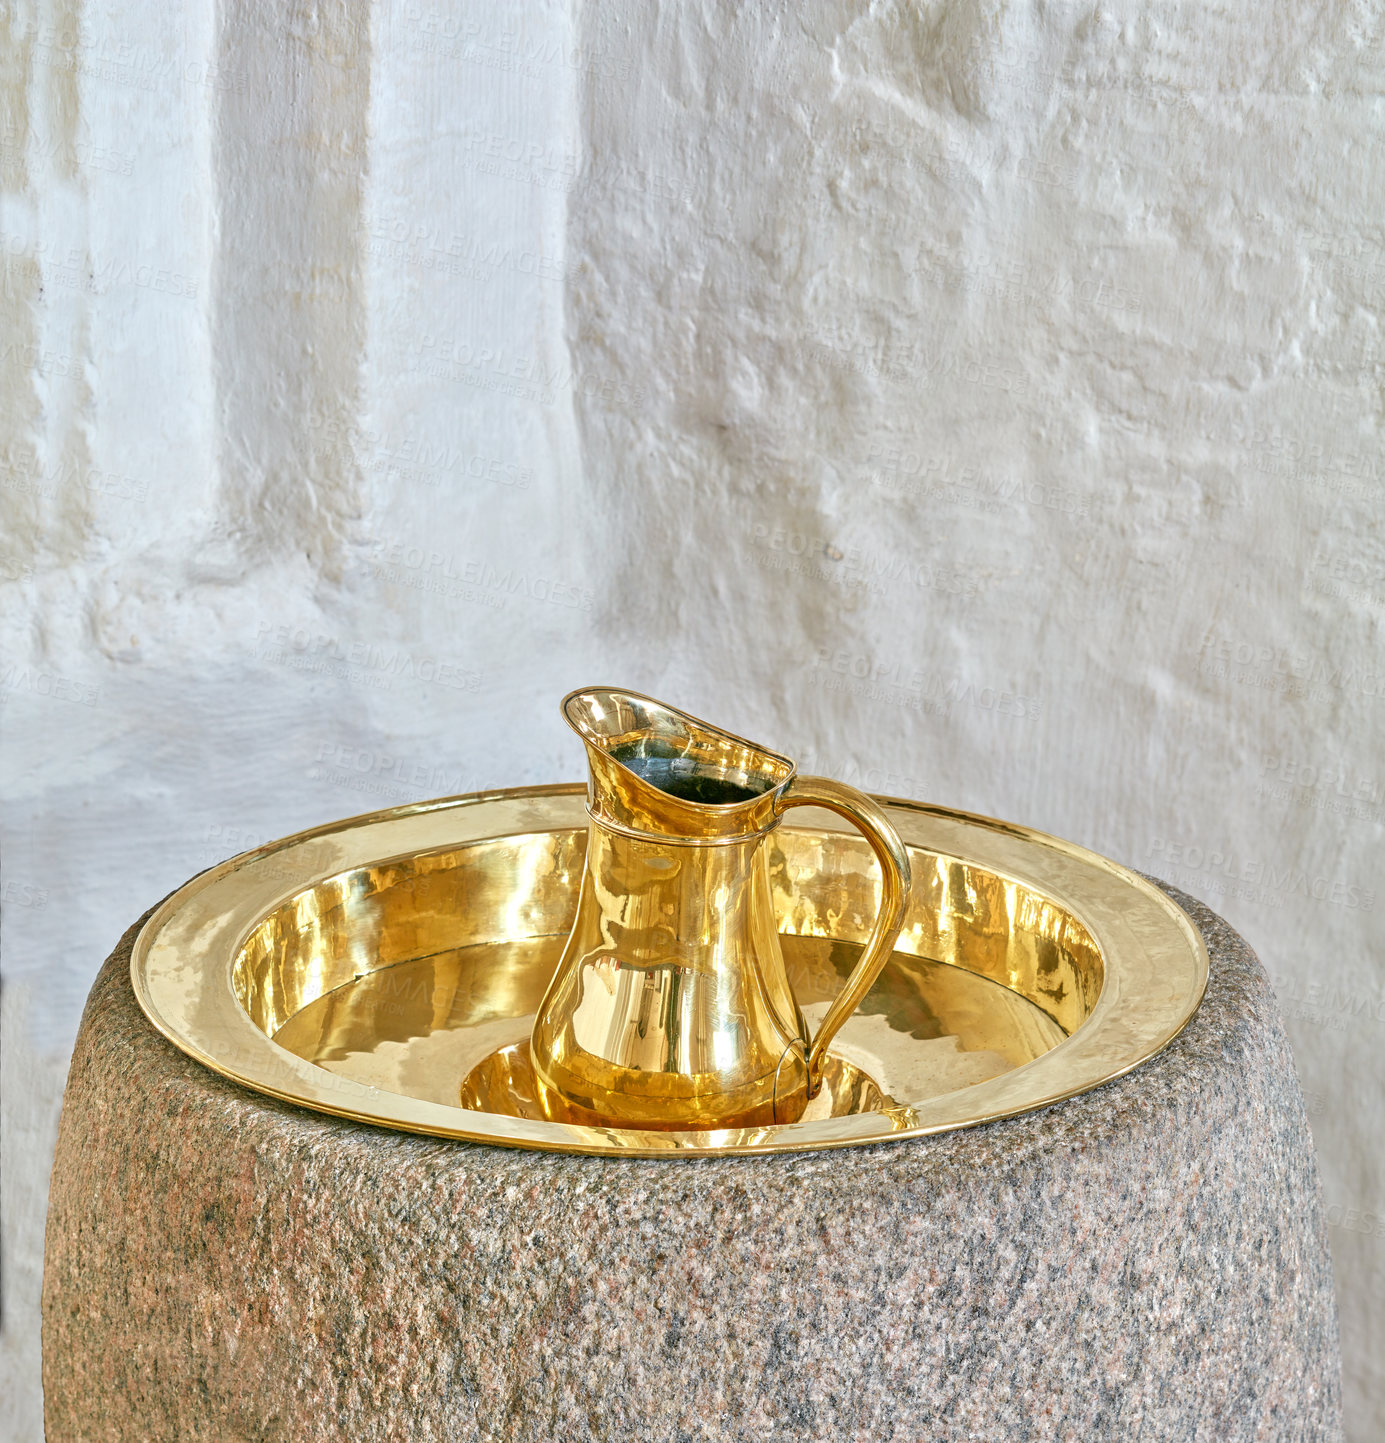 Buy stock photo Closeup of one gold and brass baptism jug on a tray in a church. A sacred pitcher used for pouring water at christening ceremonies. An antique baptismal font in the Danish National Church in Denmark